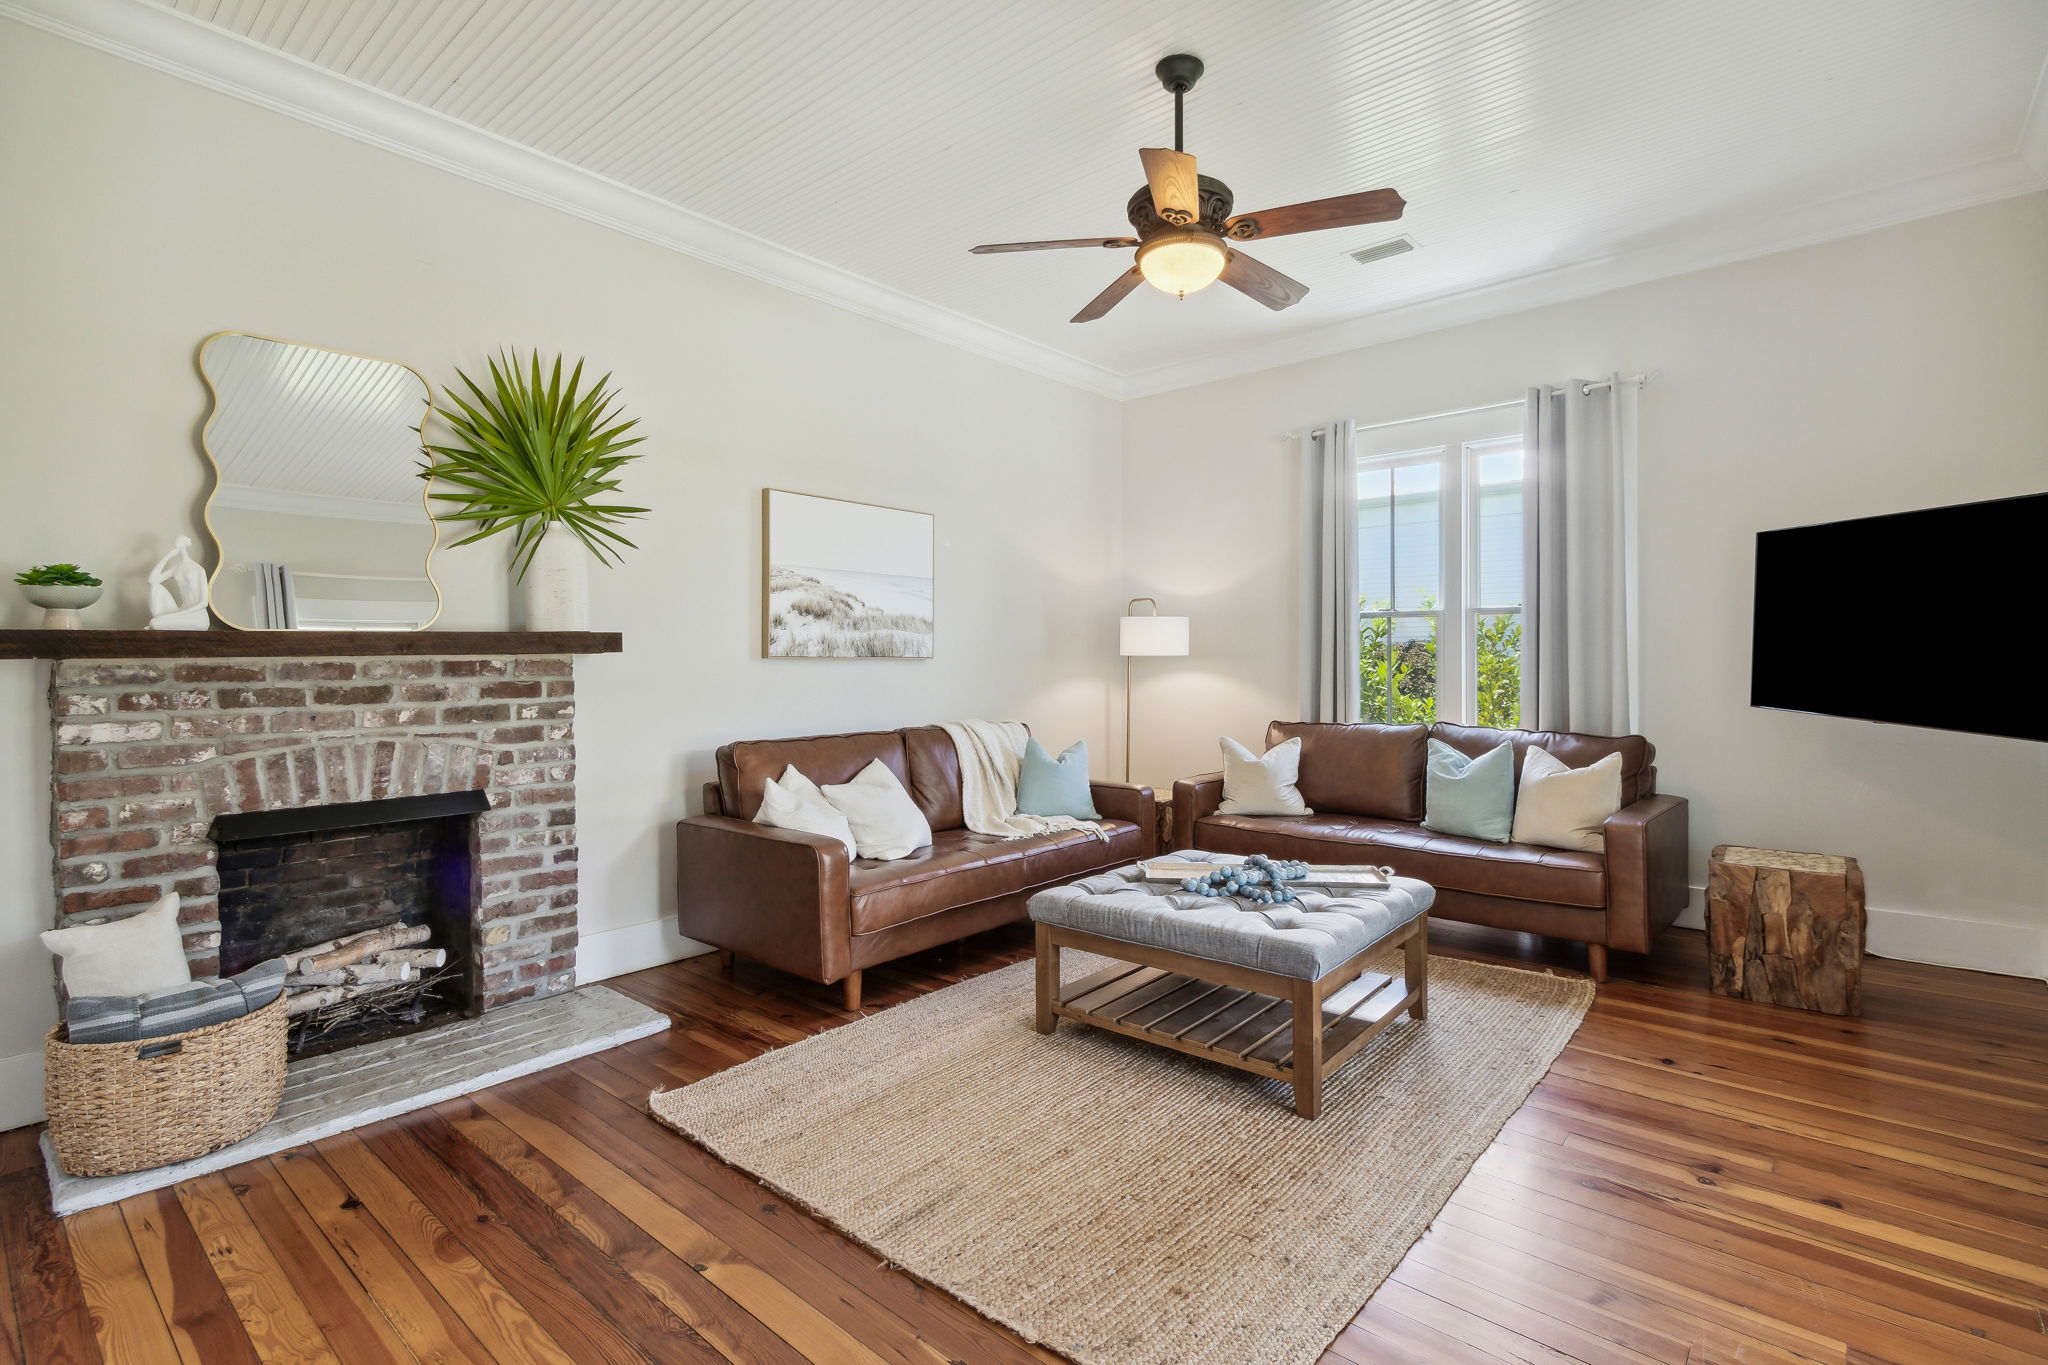 It has a bright, sunny vibe with a 10 ft. tongue and groove pine ceiling ...